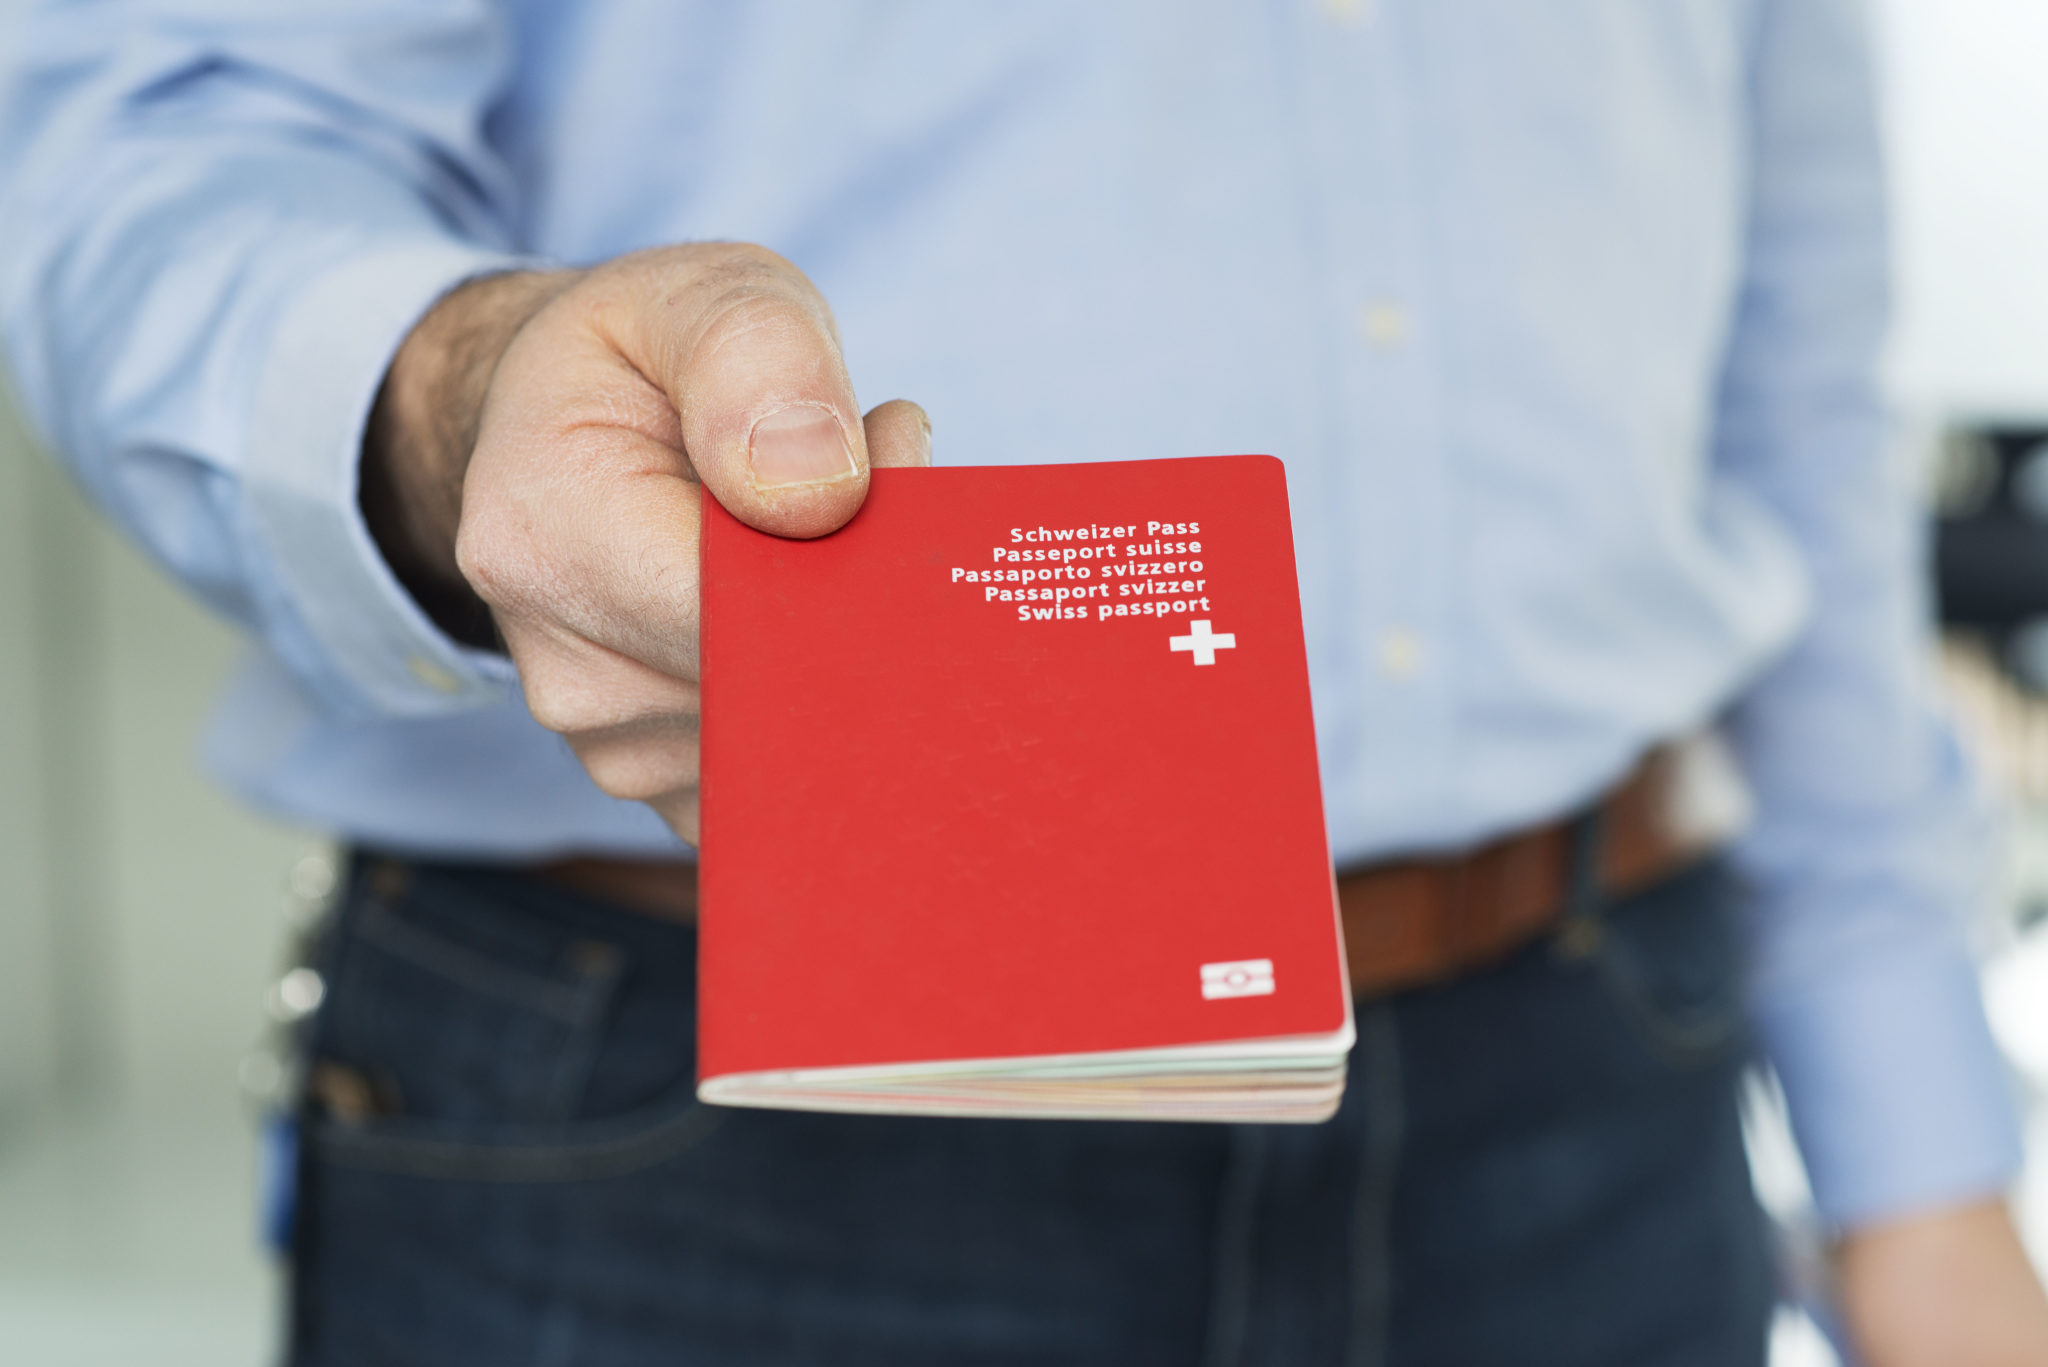 Vietnam Now Offers a Three-Month, Multiple-Entry Electronic Visa to Citizens of Switzerland Beginning in August of 2023